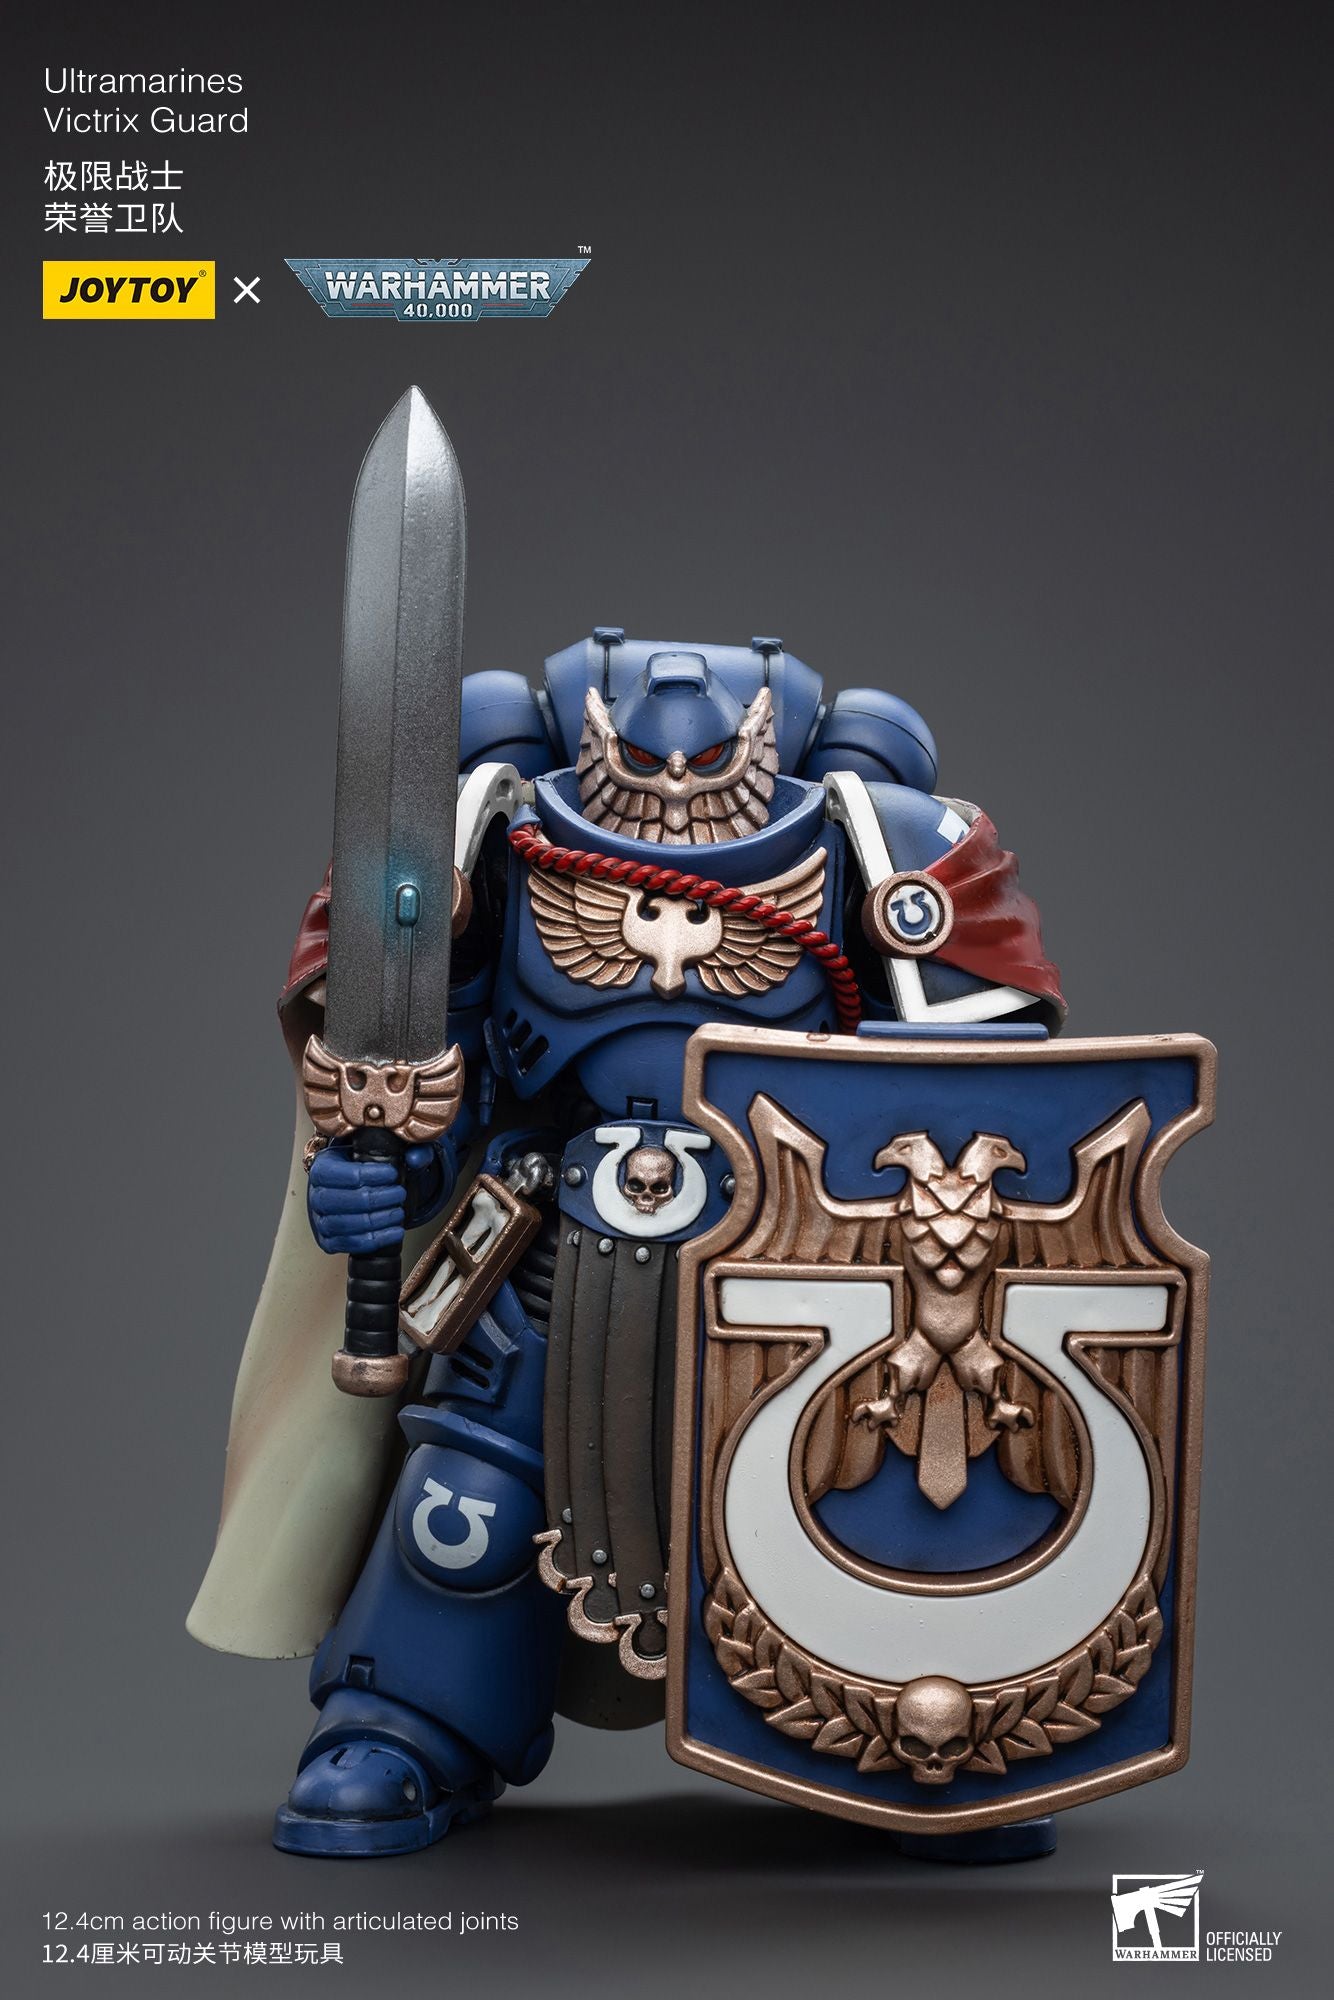 Warhammer Collectibles: 1/18 Scale Ultramarines Victrix Guard